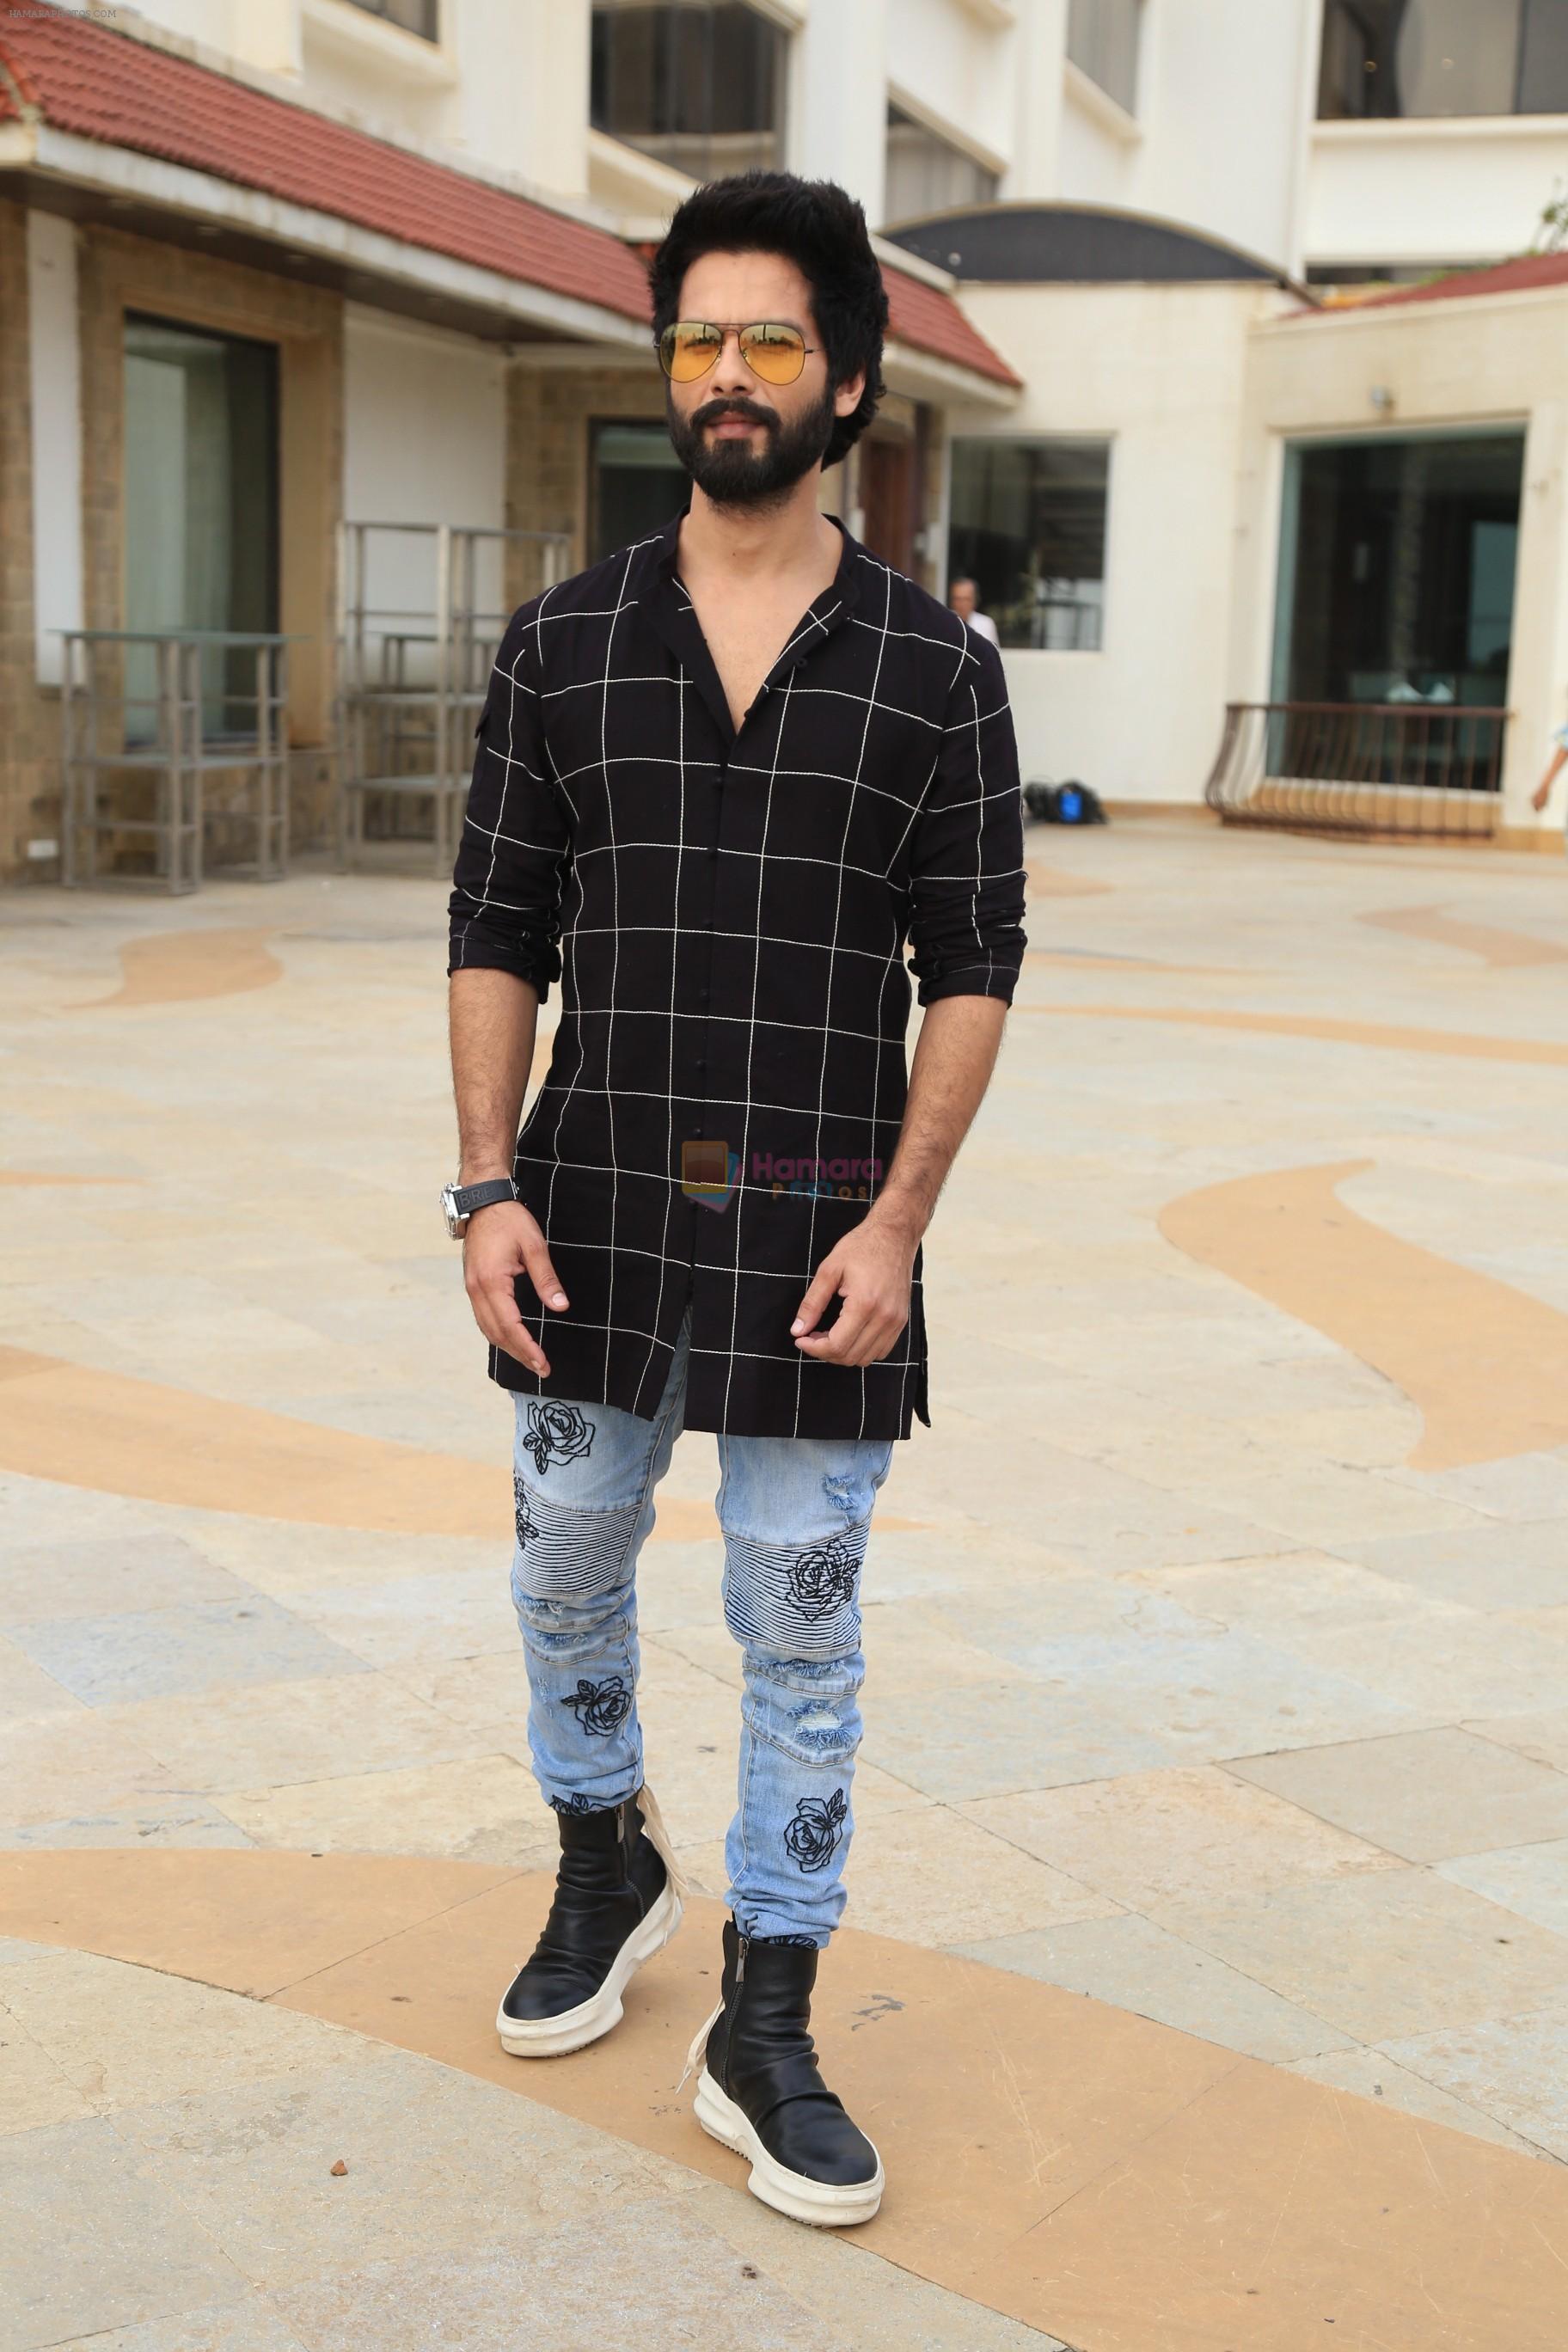 Shahid Kapoor at the promotion of film Batti Gul Meter Chalu in Sun n Sand juhu on 28th Aug 2018